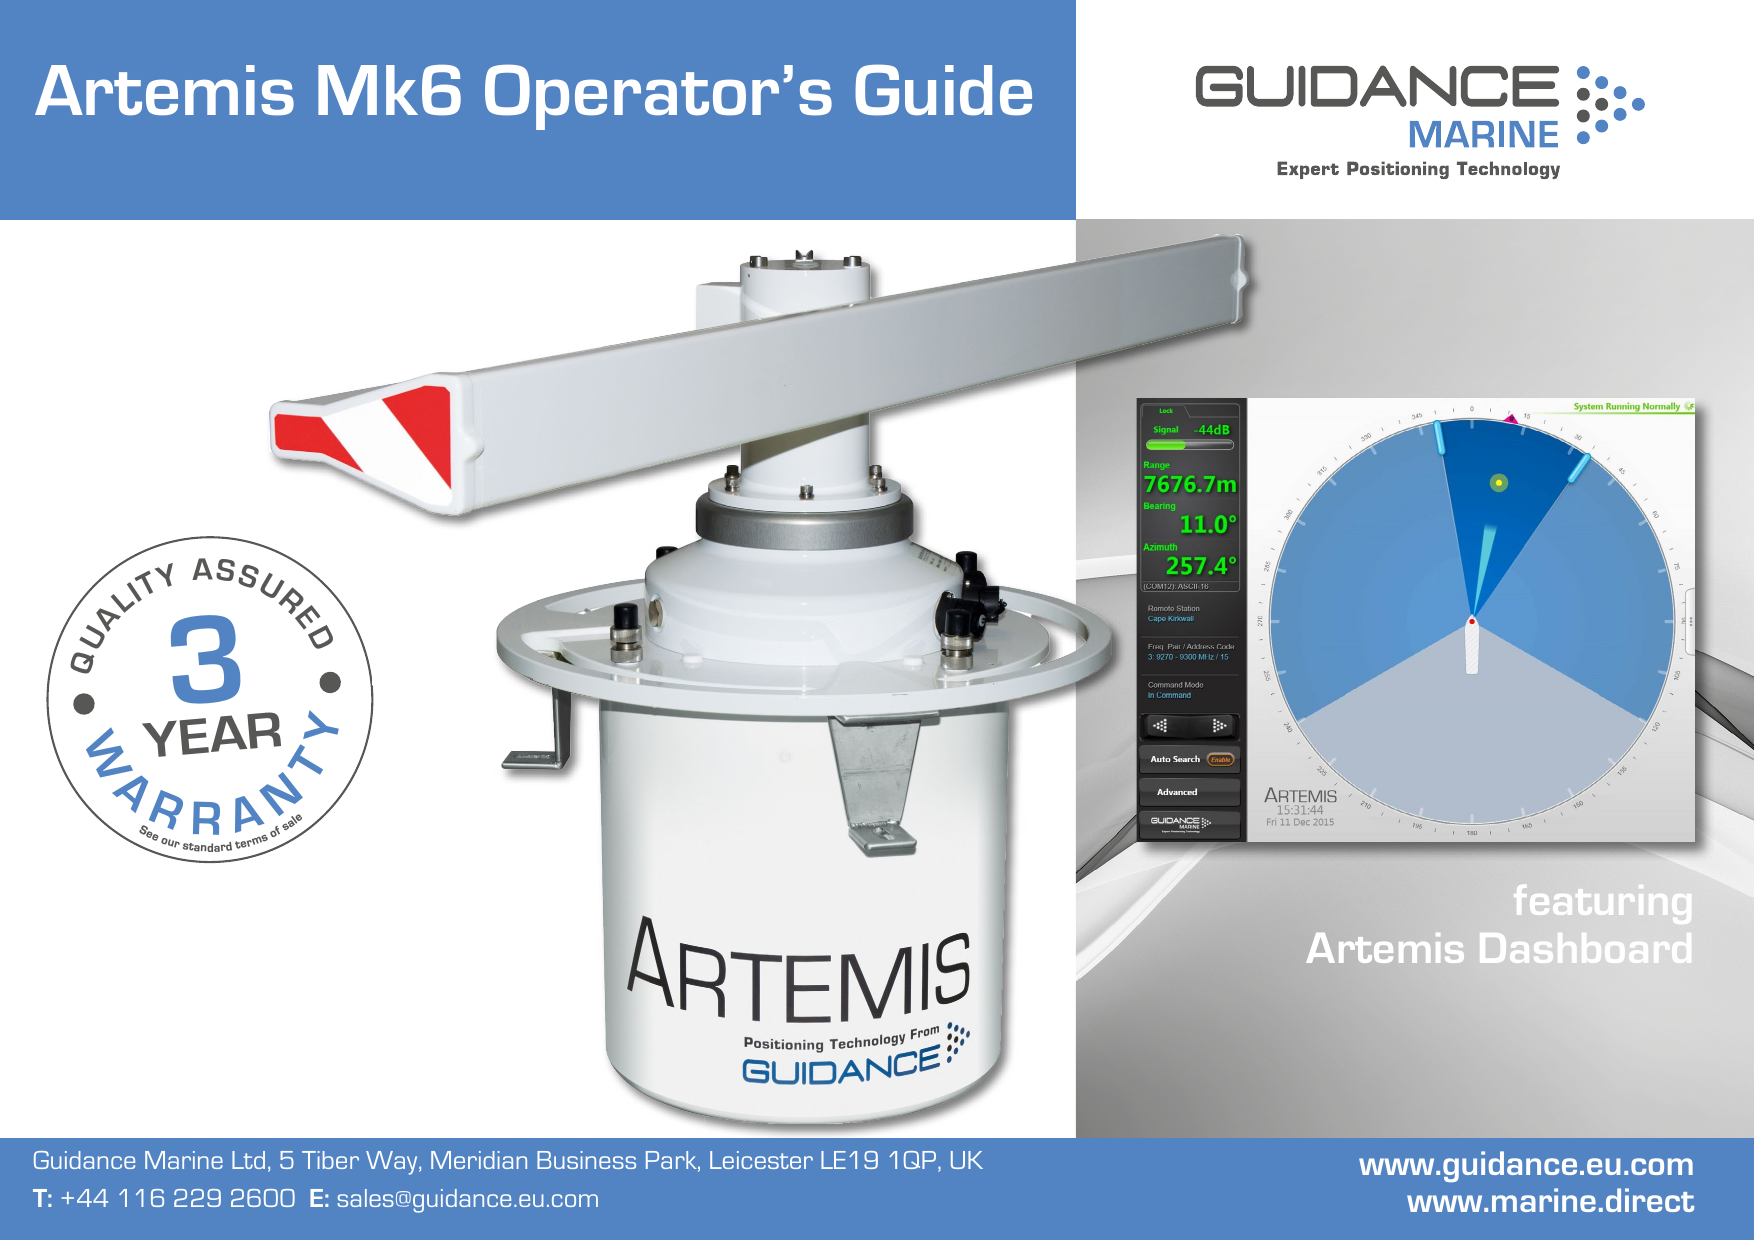 Guidance Marine Ltd, 5 Tiber Way, Meridian Business Park, Leicester LE19 1QP, UK T: +44 116 229 2600  E: sales@guidance.eu.comArtemis Mk6 Operator’s GuideWARRANTYSee our standard terms of saleQUALITY ASSURED3YEARfeaturing Artemis Dashboardwww.guidance.eu.comwww.marine.direct